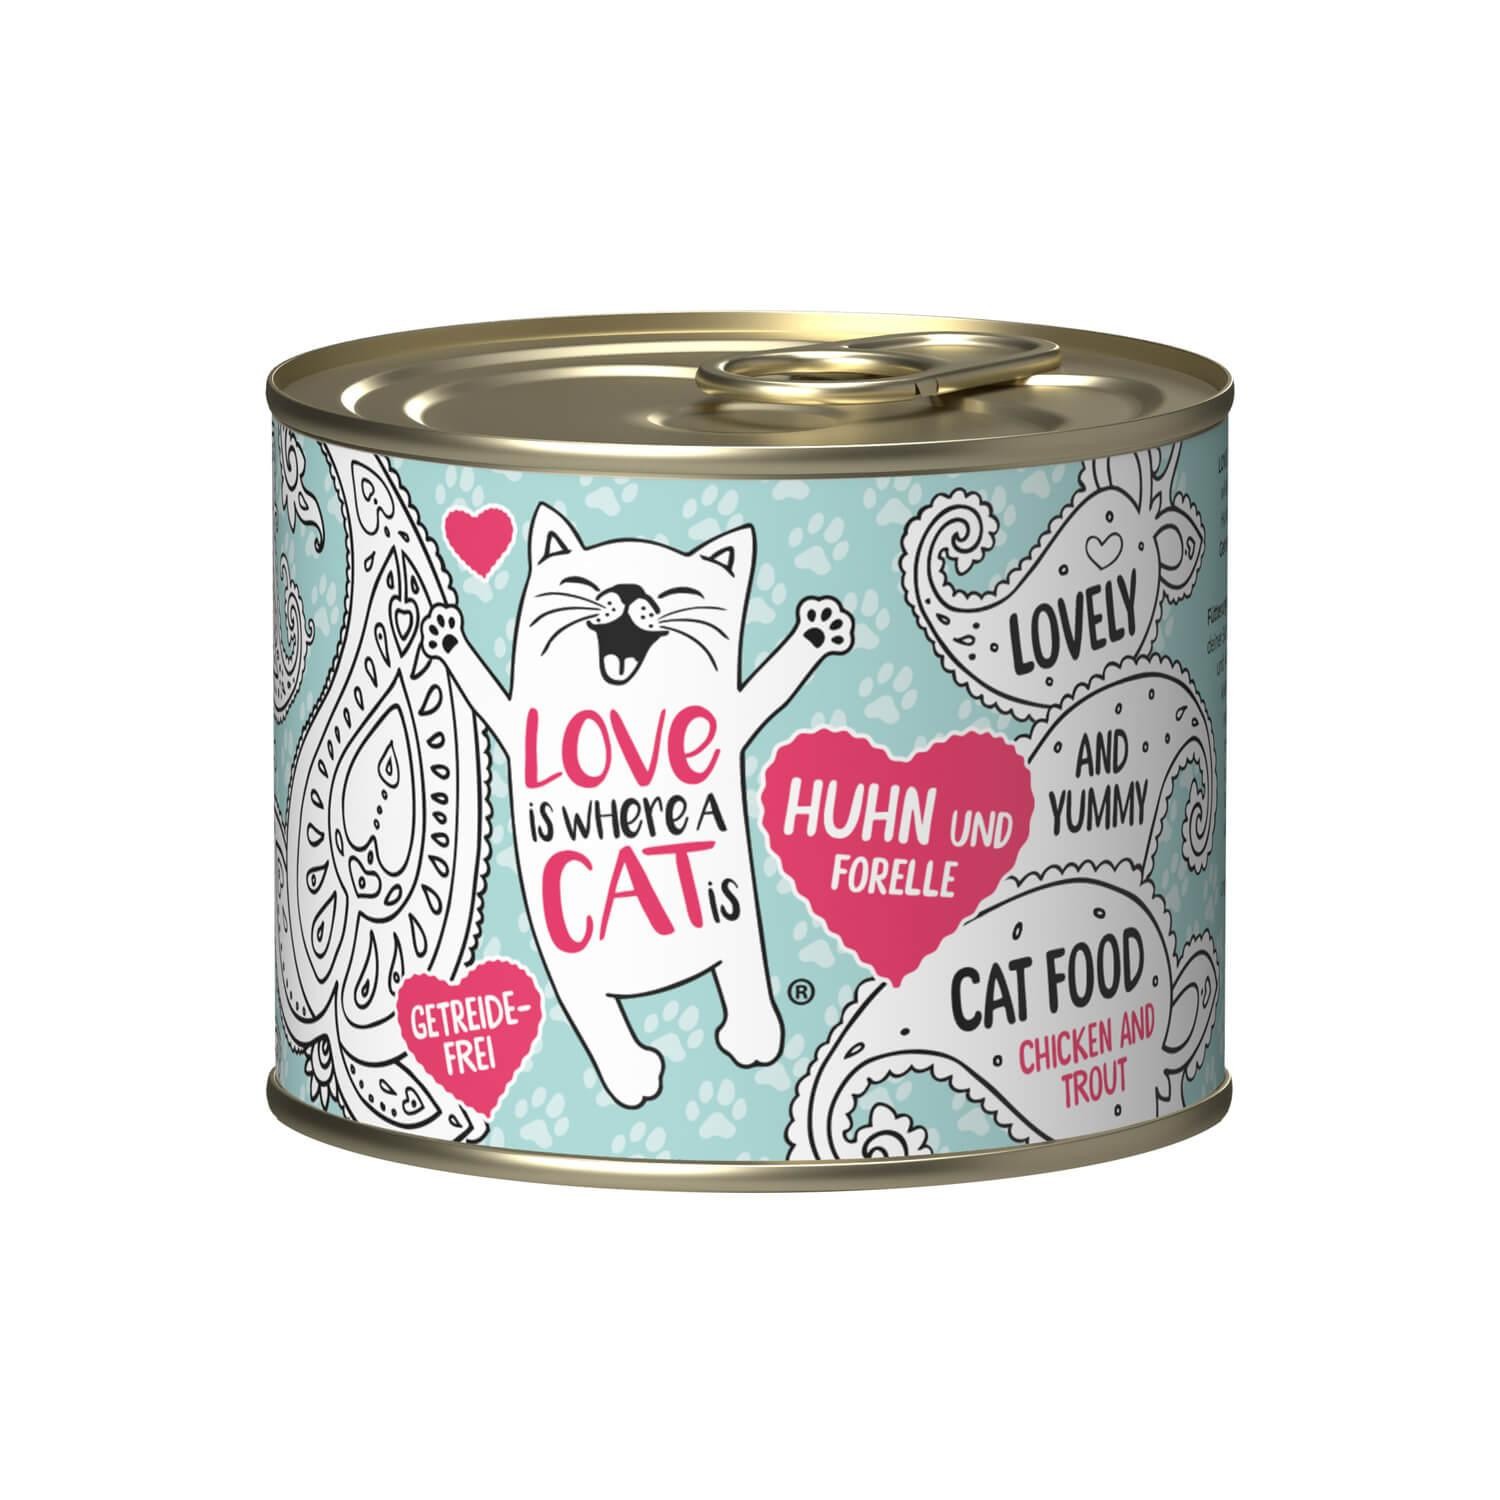 LOVE IS WHERE A CAT IS® 6x200g Huhn und Forelle